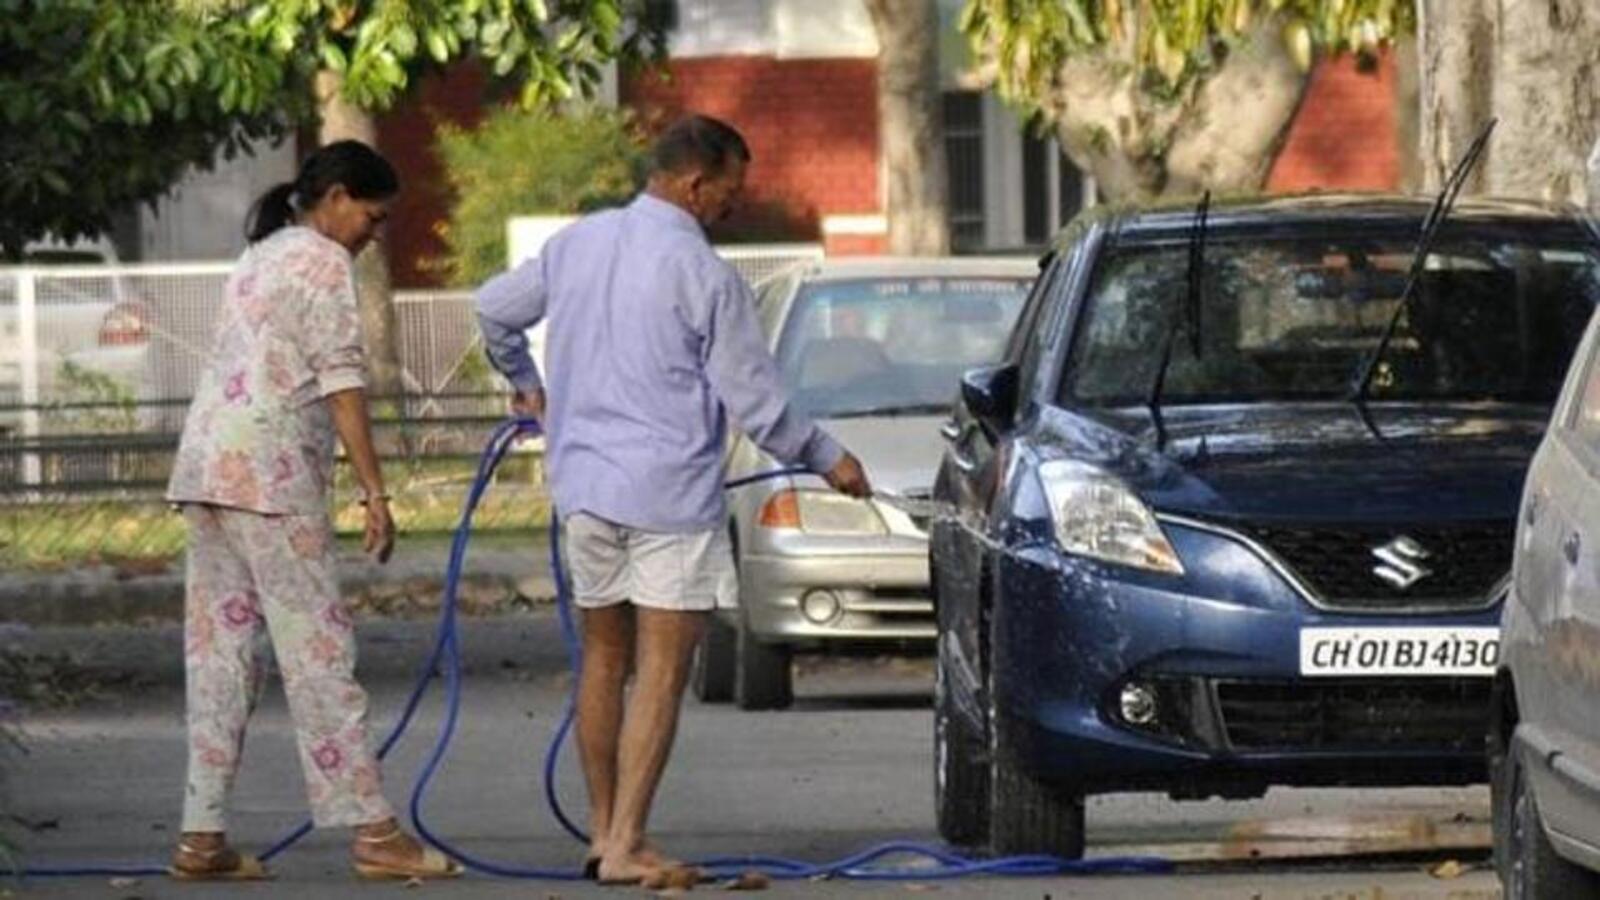 Car washing is an offence in water crisis-struck Gurgaon - India Today